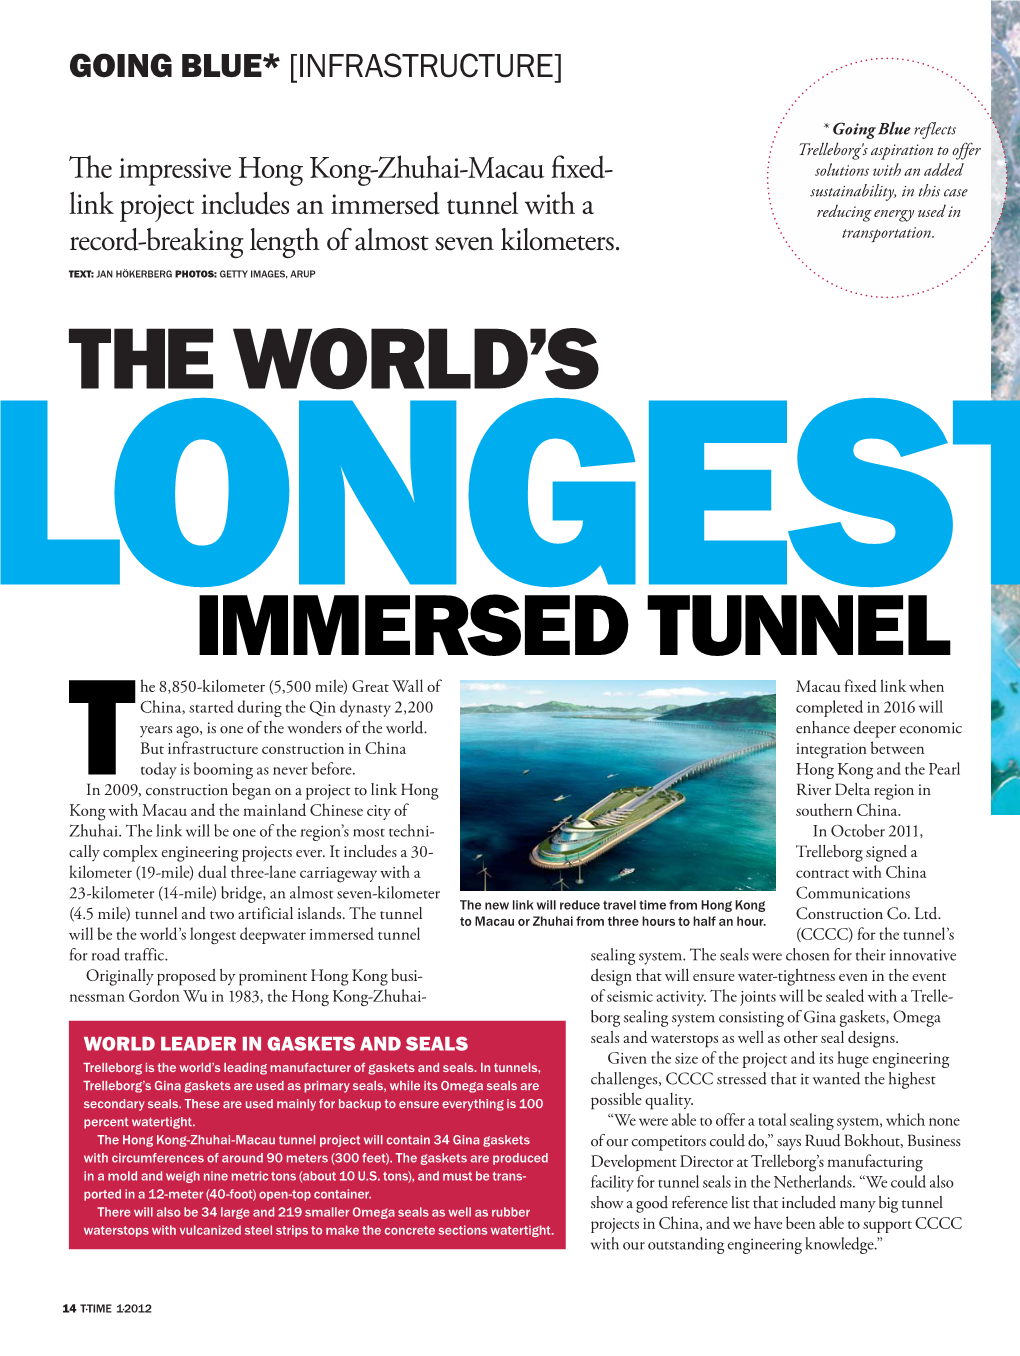 Immersed Tunnel the World's